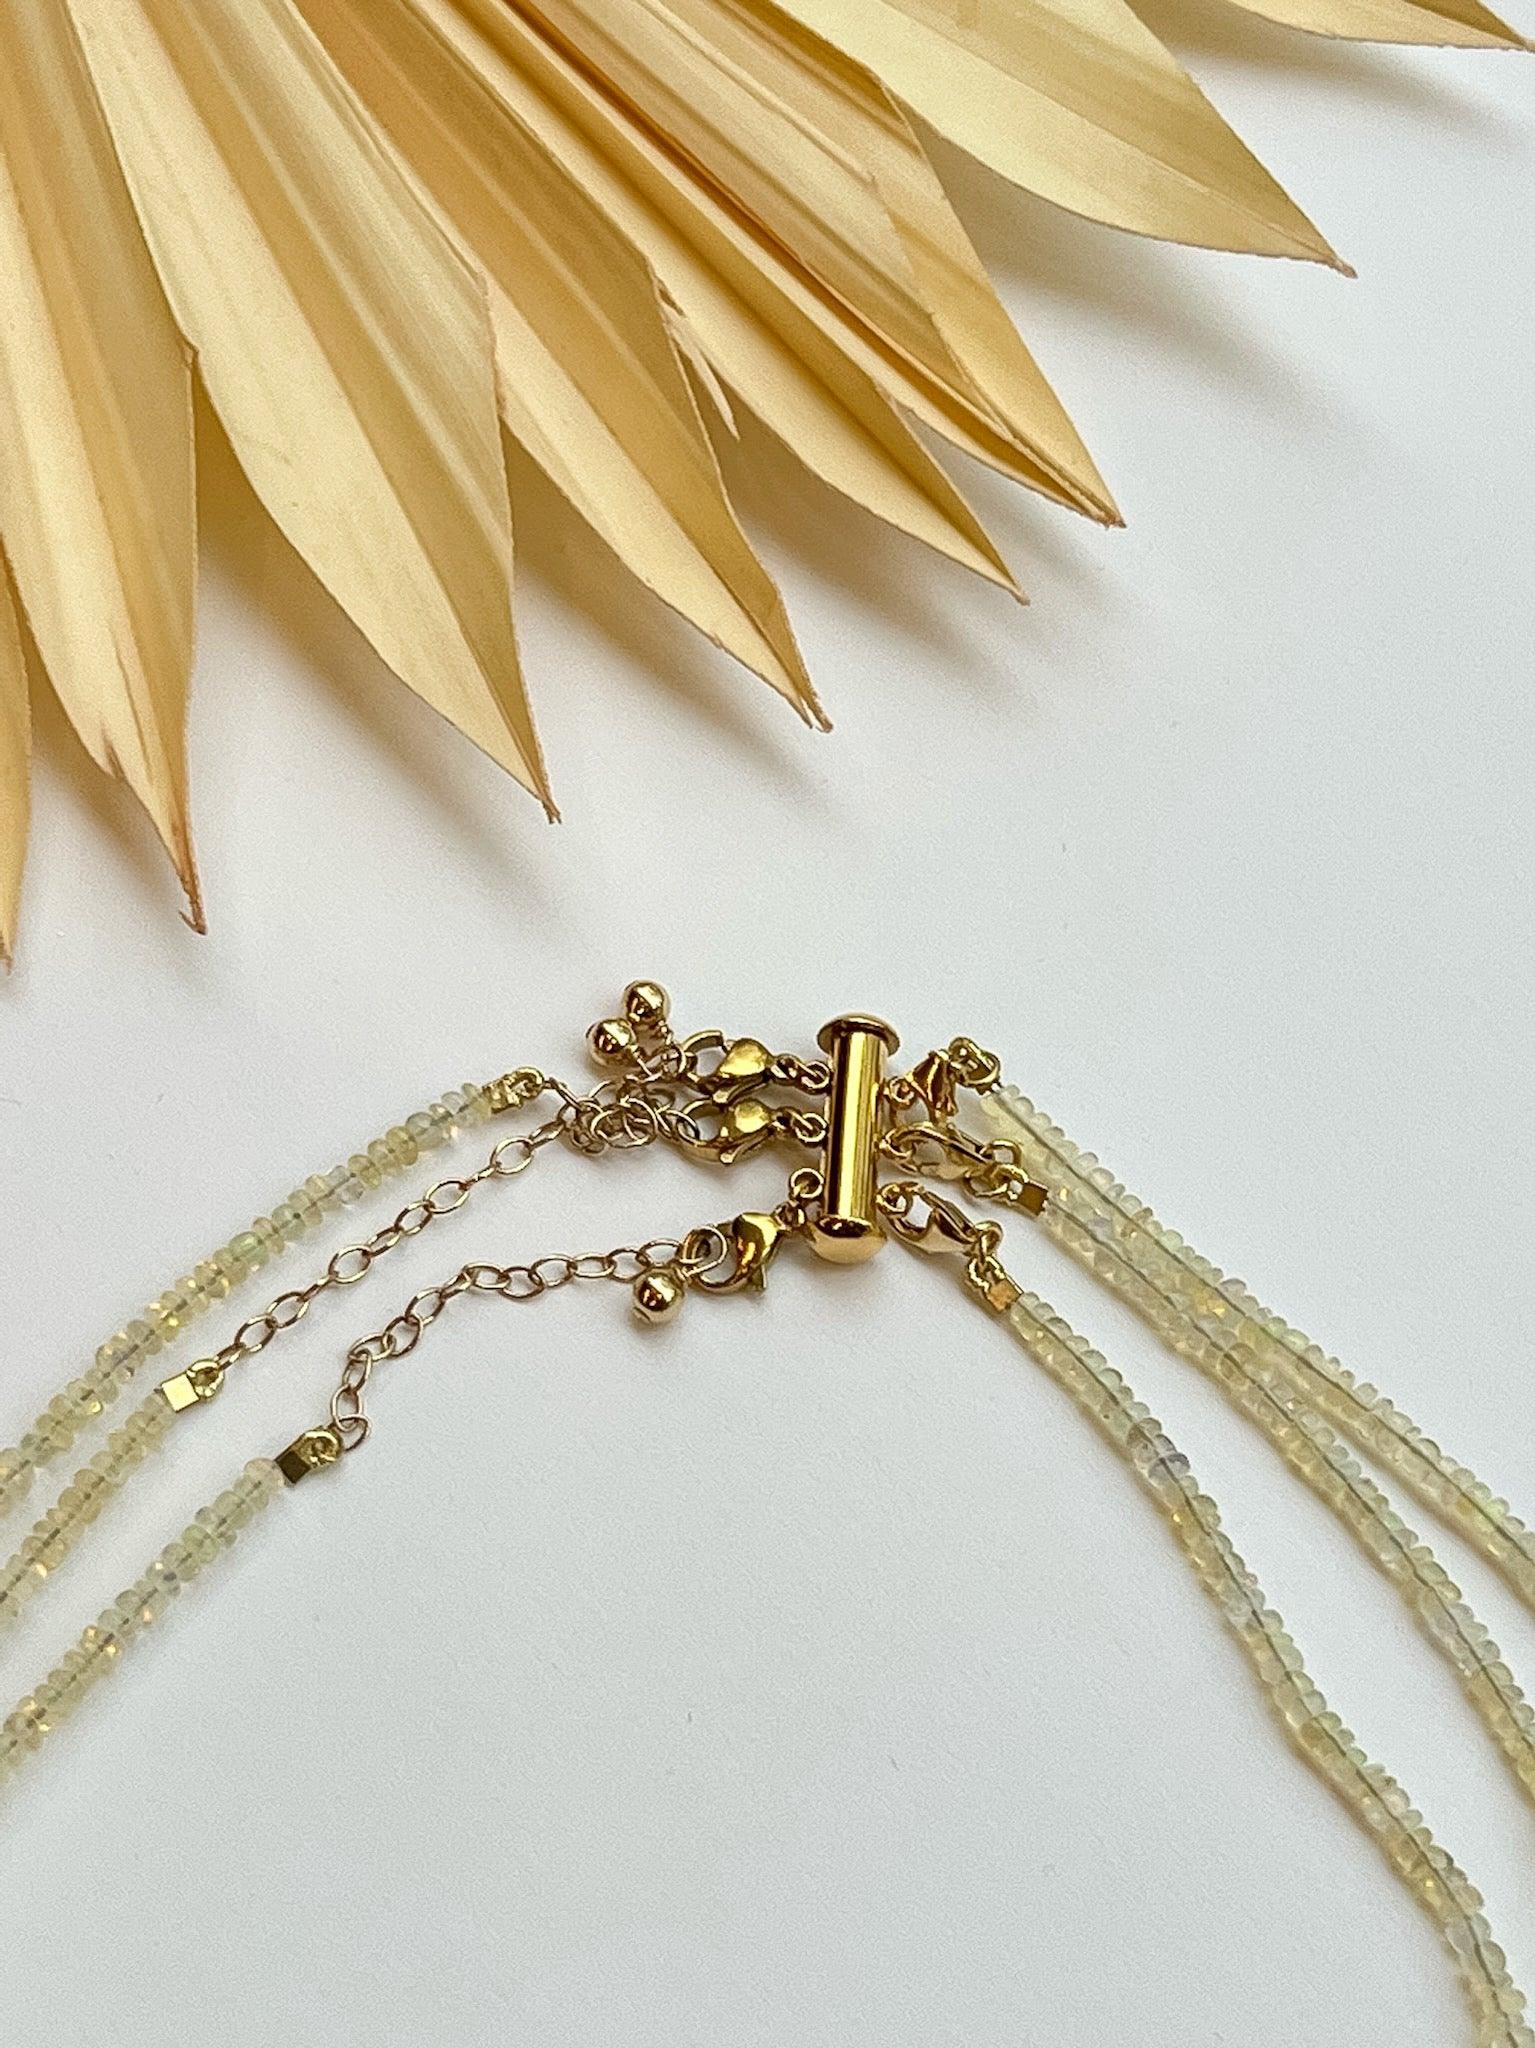 Buy Layered Necklace Spacer Clasp, Gold, Silver or Rose Gold, No More  Tangle, No More Mess. Detangling, Detangled, Layering Magicchristmas Gift  Online in India - Etsy